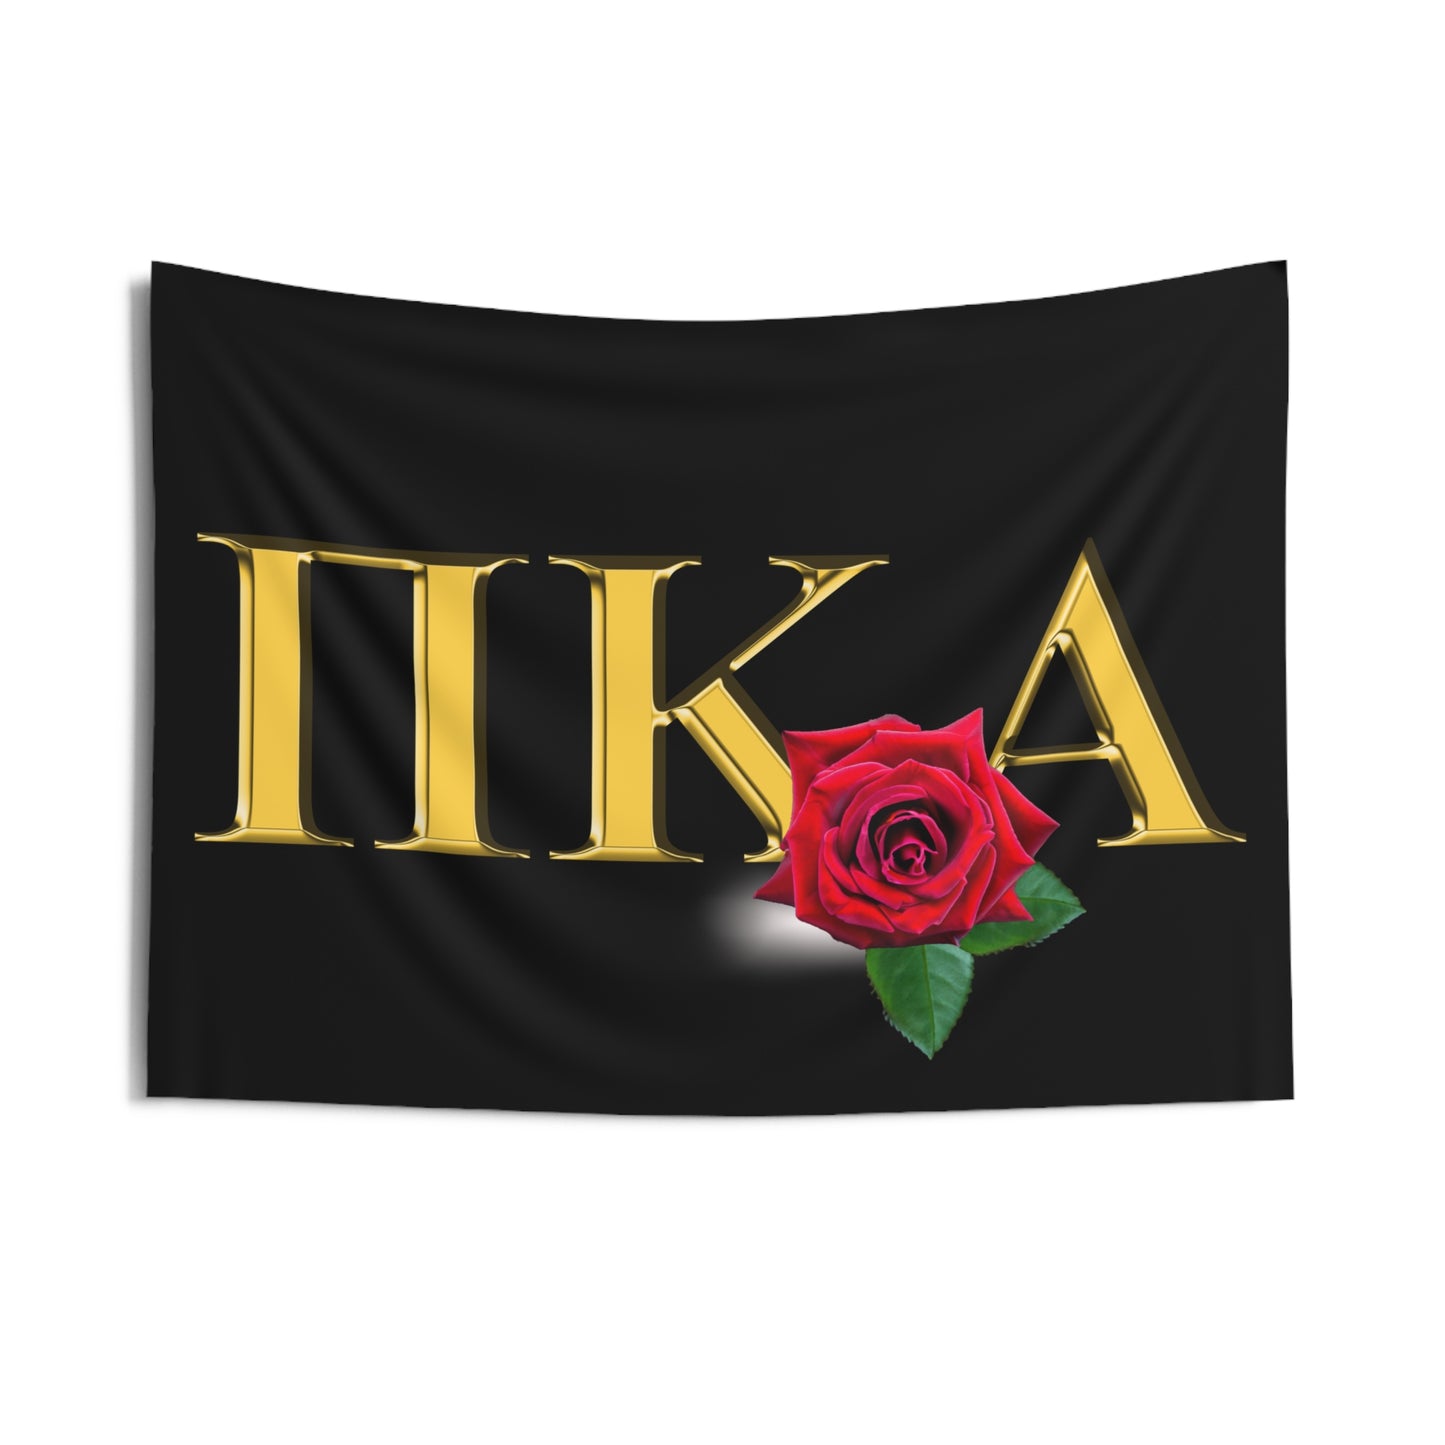 Pi Kappa Alpha Wall Flag with Gold Letters Fraternity Home Decoration for Dorms & Apartments